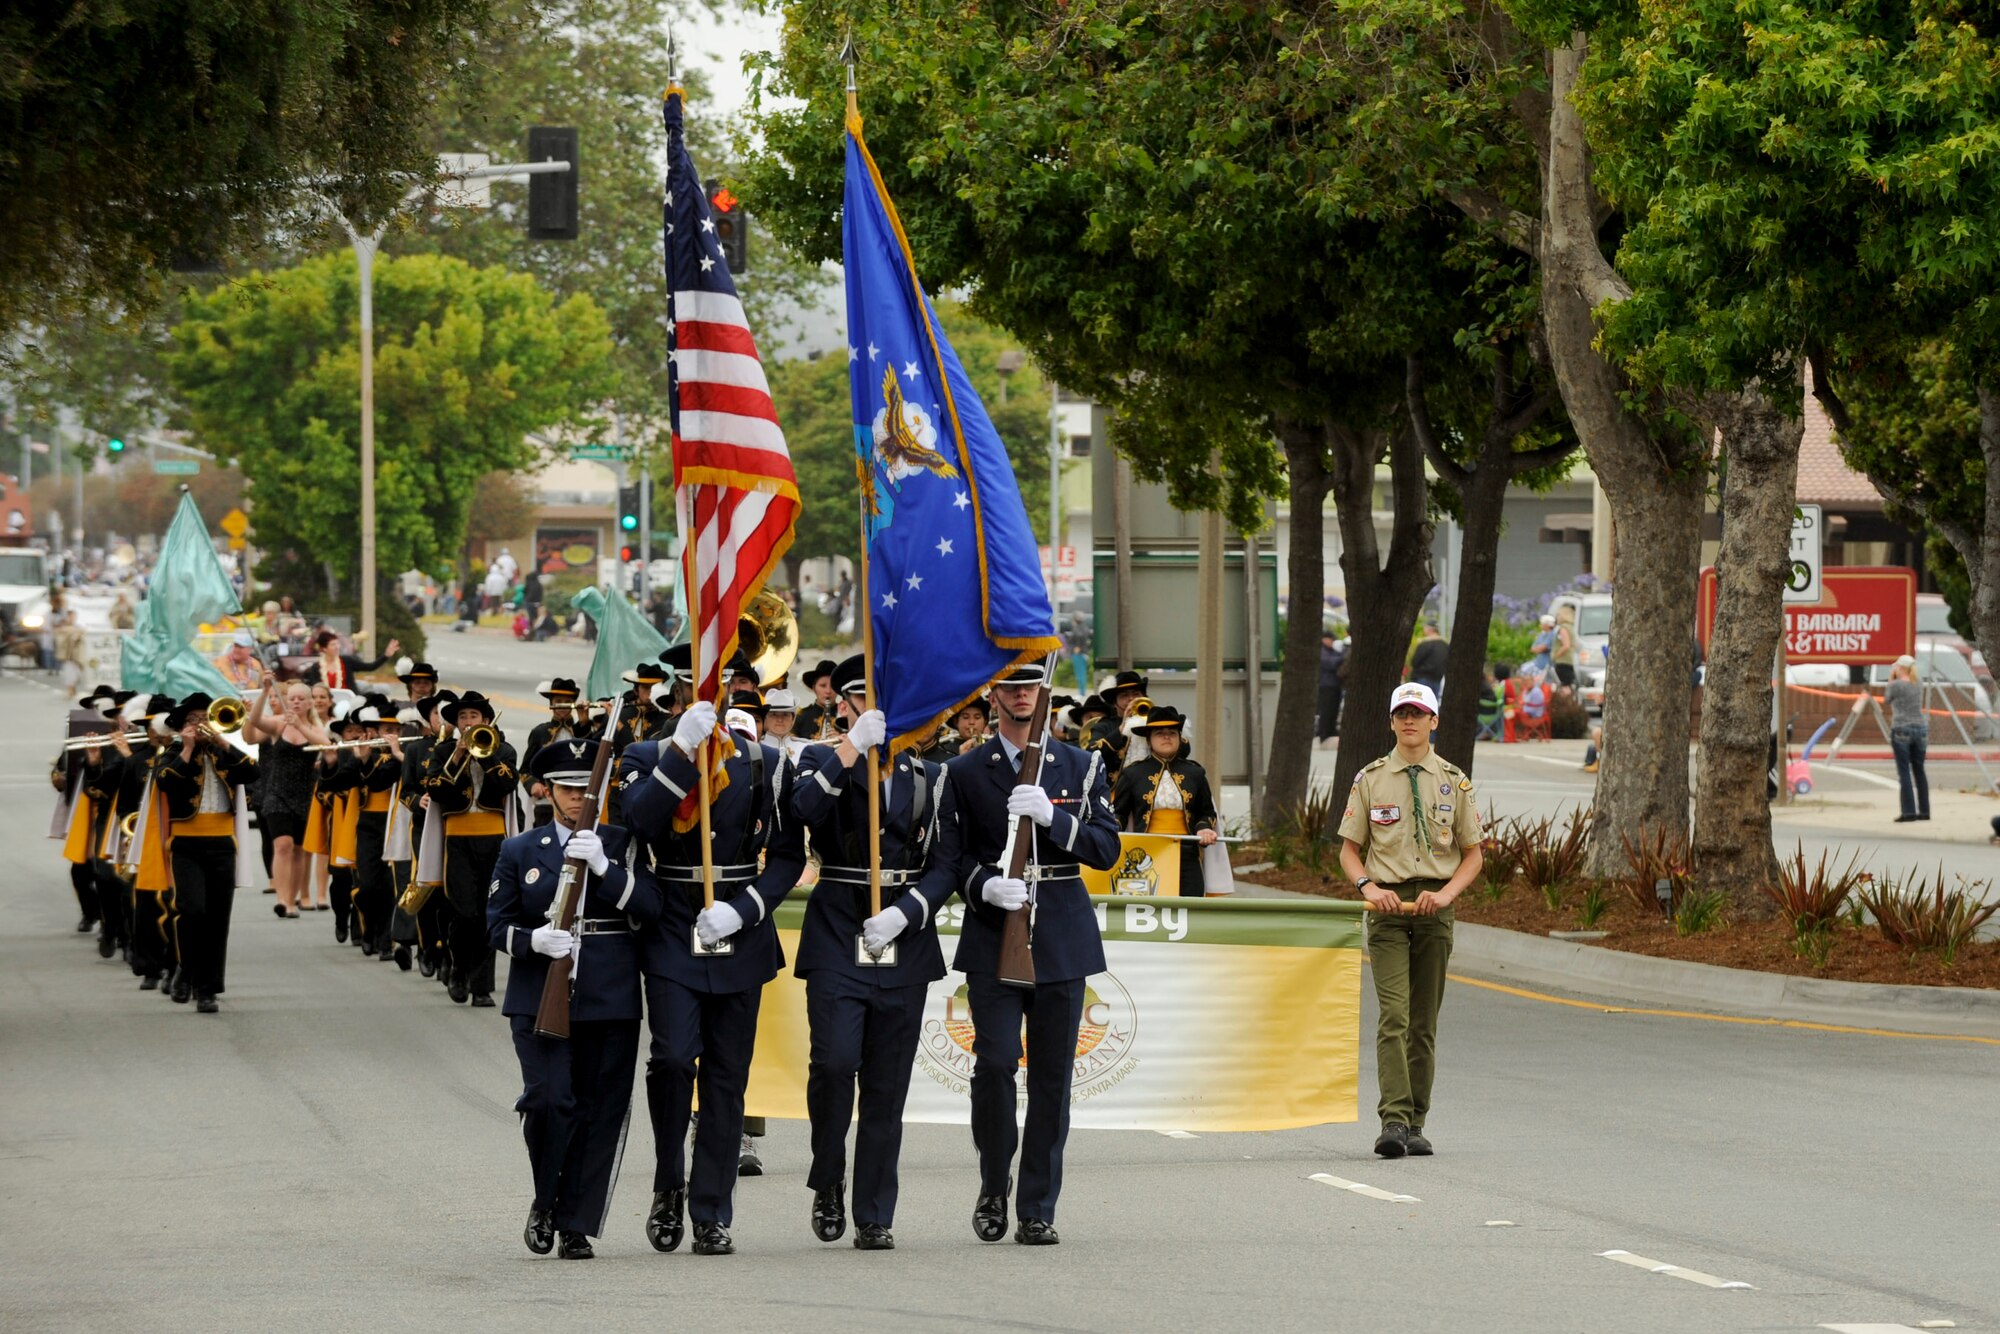 VANDENBERG AIR FORCE BASE, Calif. - The Vandenberg Air Force Base Honor Guard marches during the city of Lompoc's 60th Annual Flower Festival Saturday, June 23, 2012. The parade is part of a five day event that celebrates Lompoc’s flower fields and culture. (U.S. Air Force photo/Staff Sgt. Levi Riendeau)